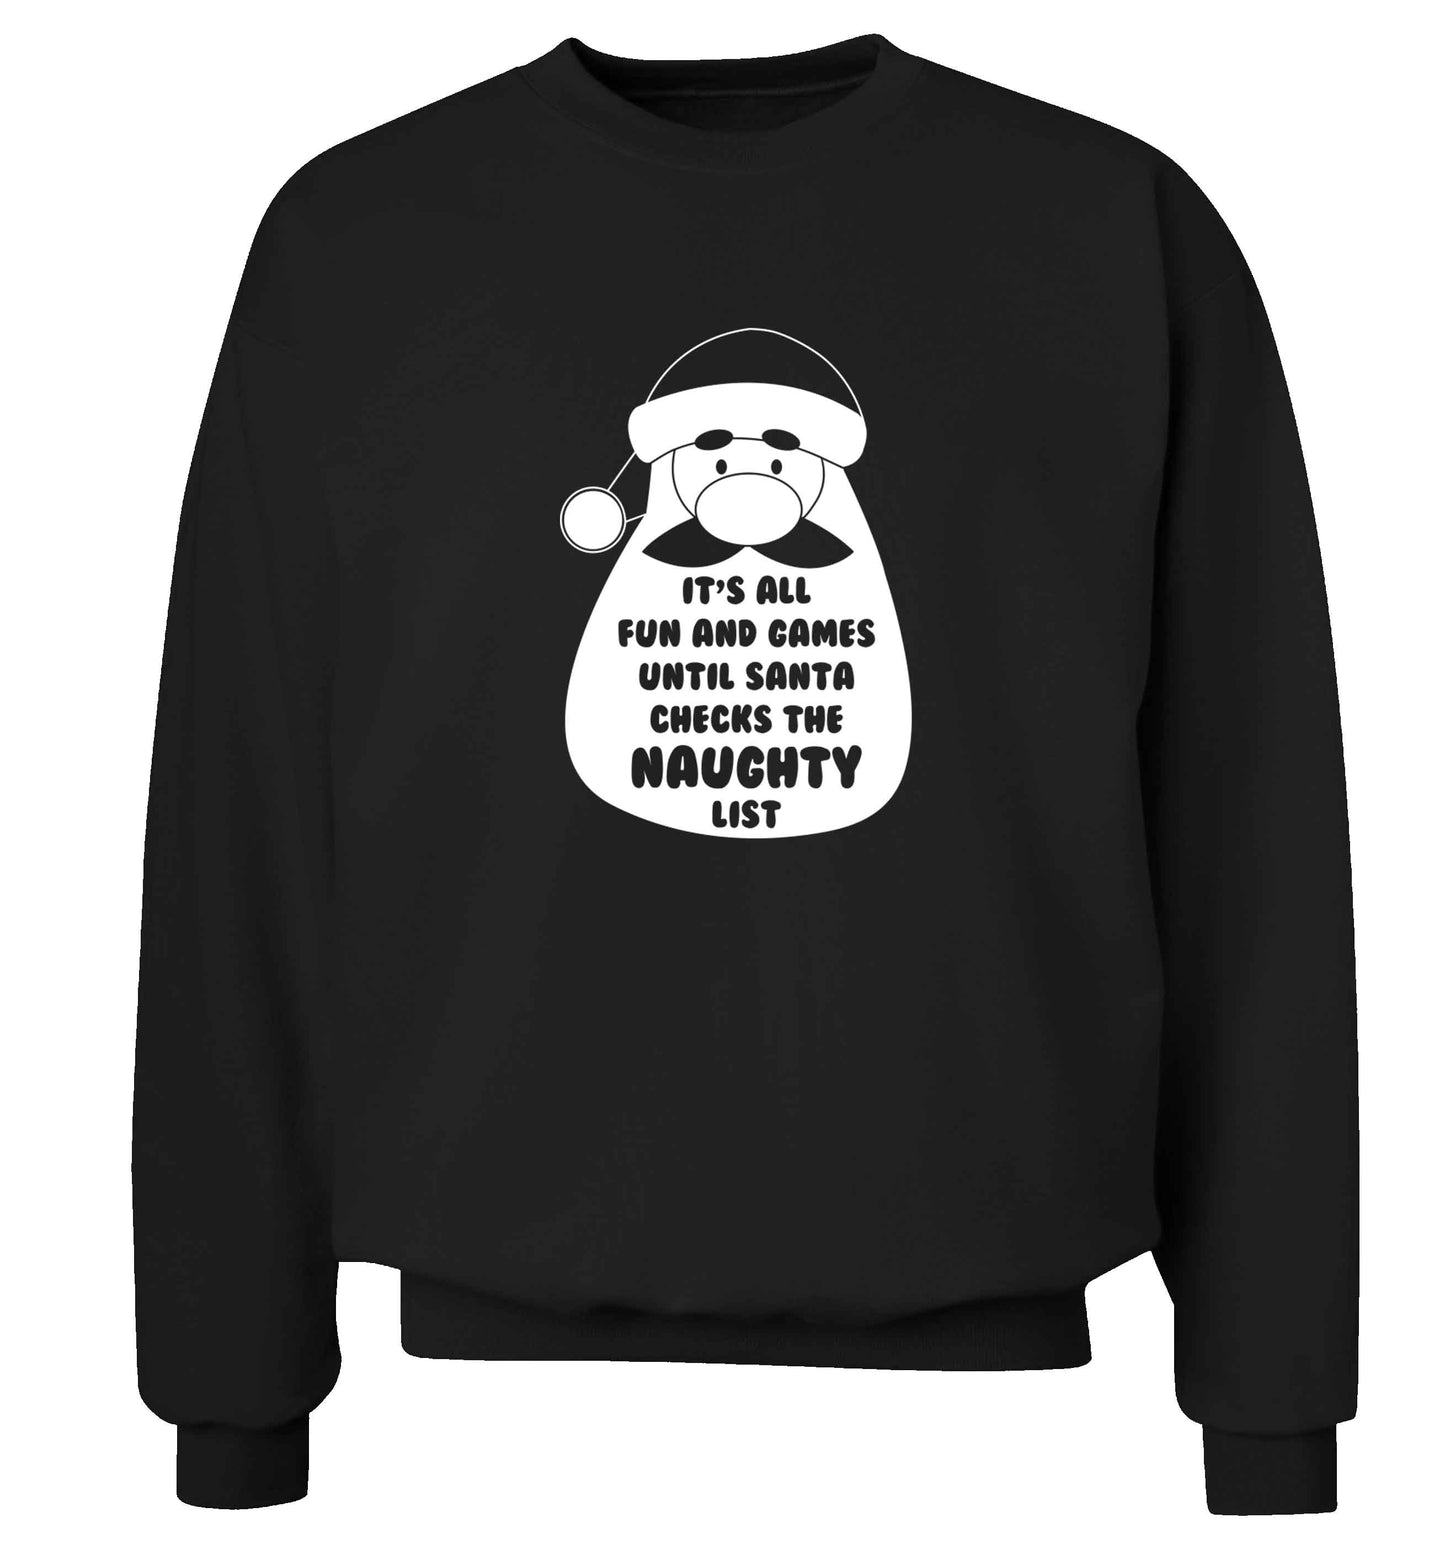 It's all fun and games until Santa checks the naughty list adult's unisex black sweater 2XL